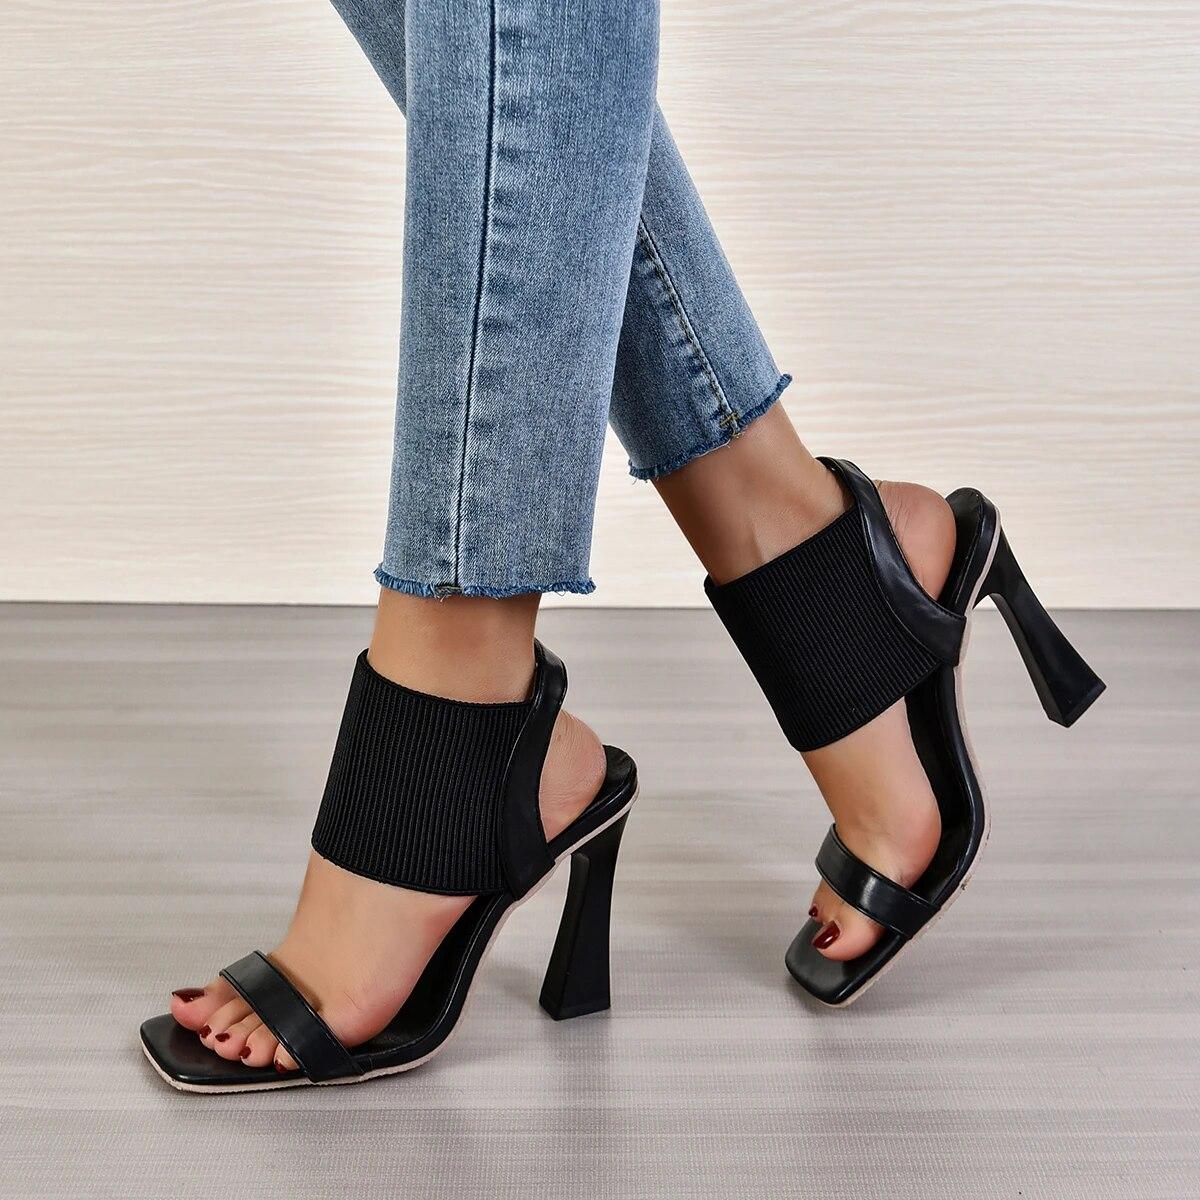 High Heeled Shoes Summer New Square Head Women's Shoes Fashion Elastic Band Women's Sandals Zapatos De Tacon Mujer Elega